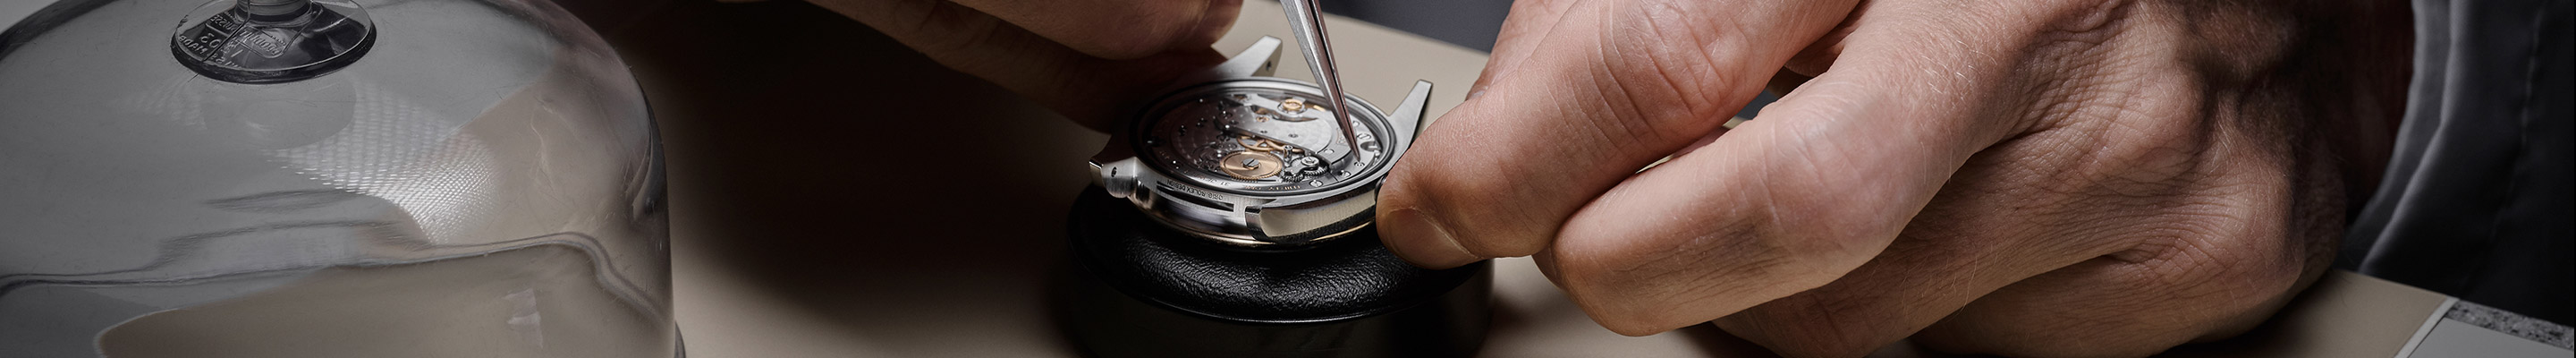 The open caseback of a Rolex watch being serviced